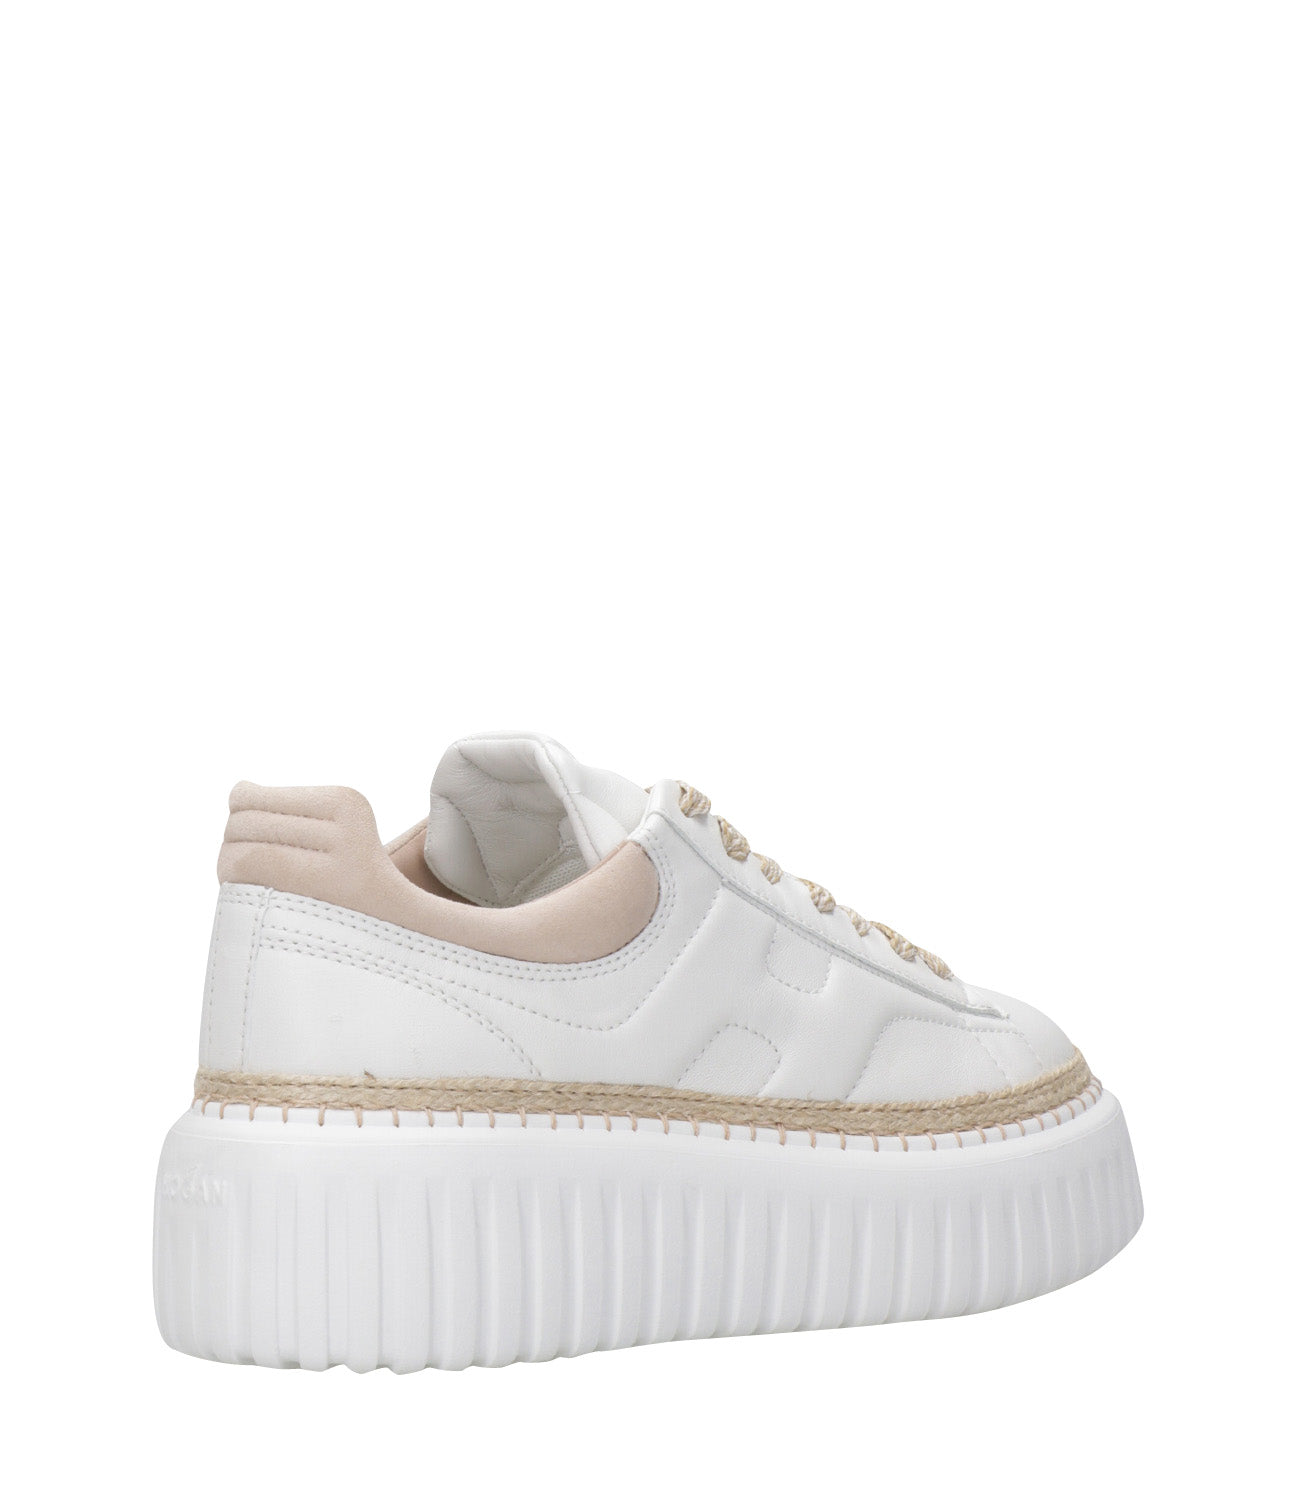 Hogan | Sneakers H-Stripes H659 White and Old Pink